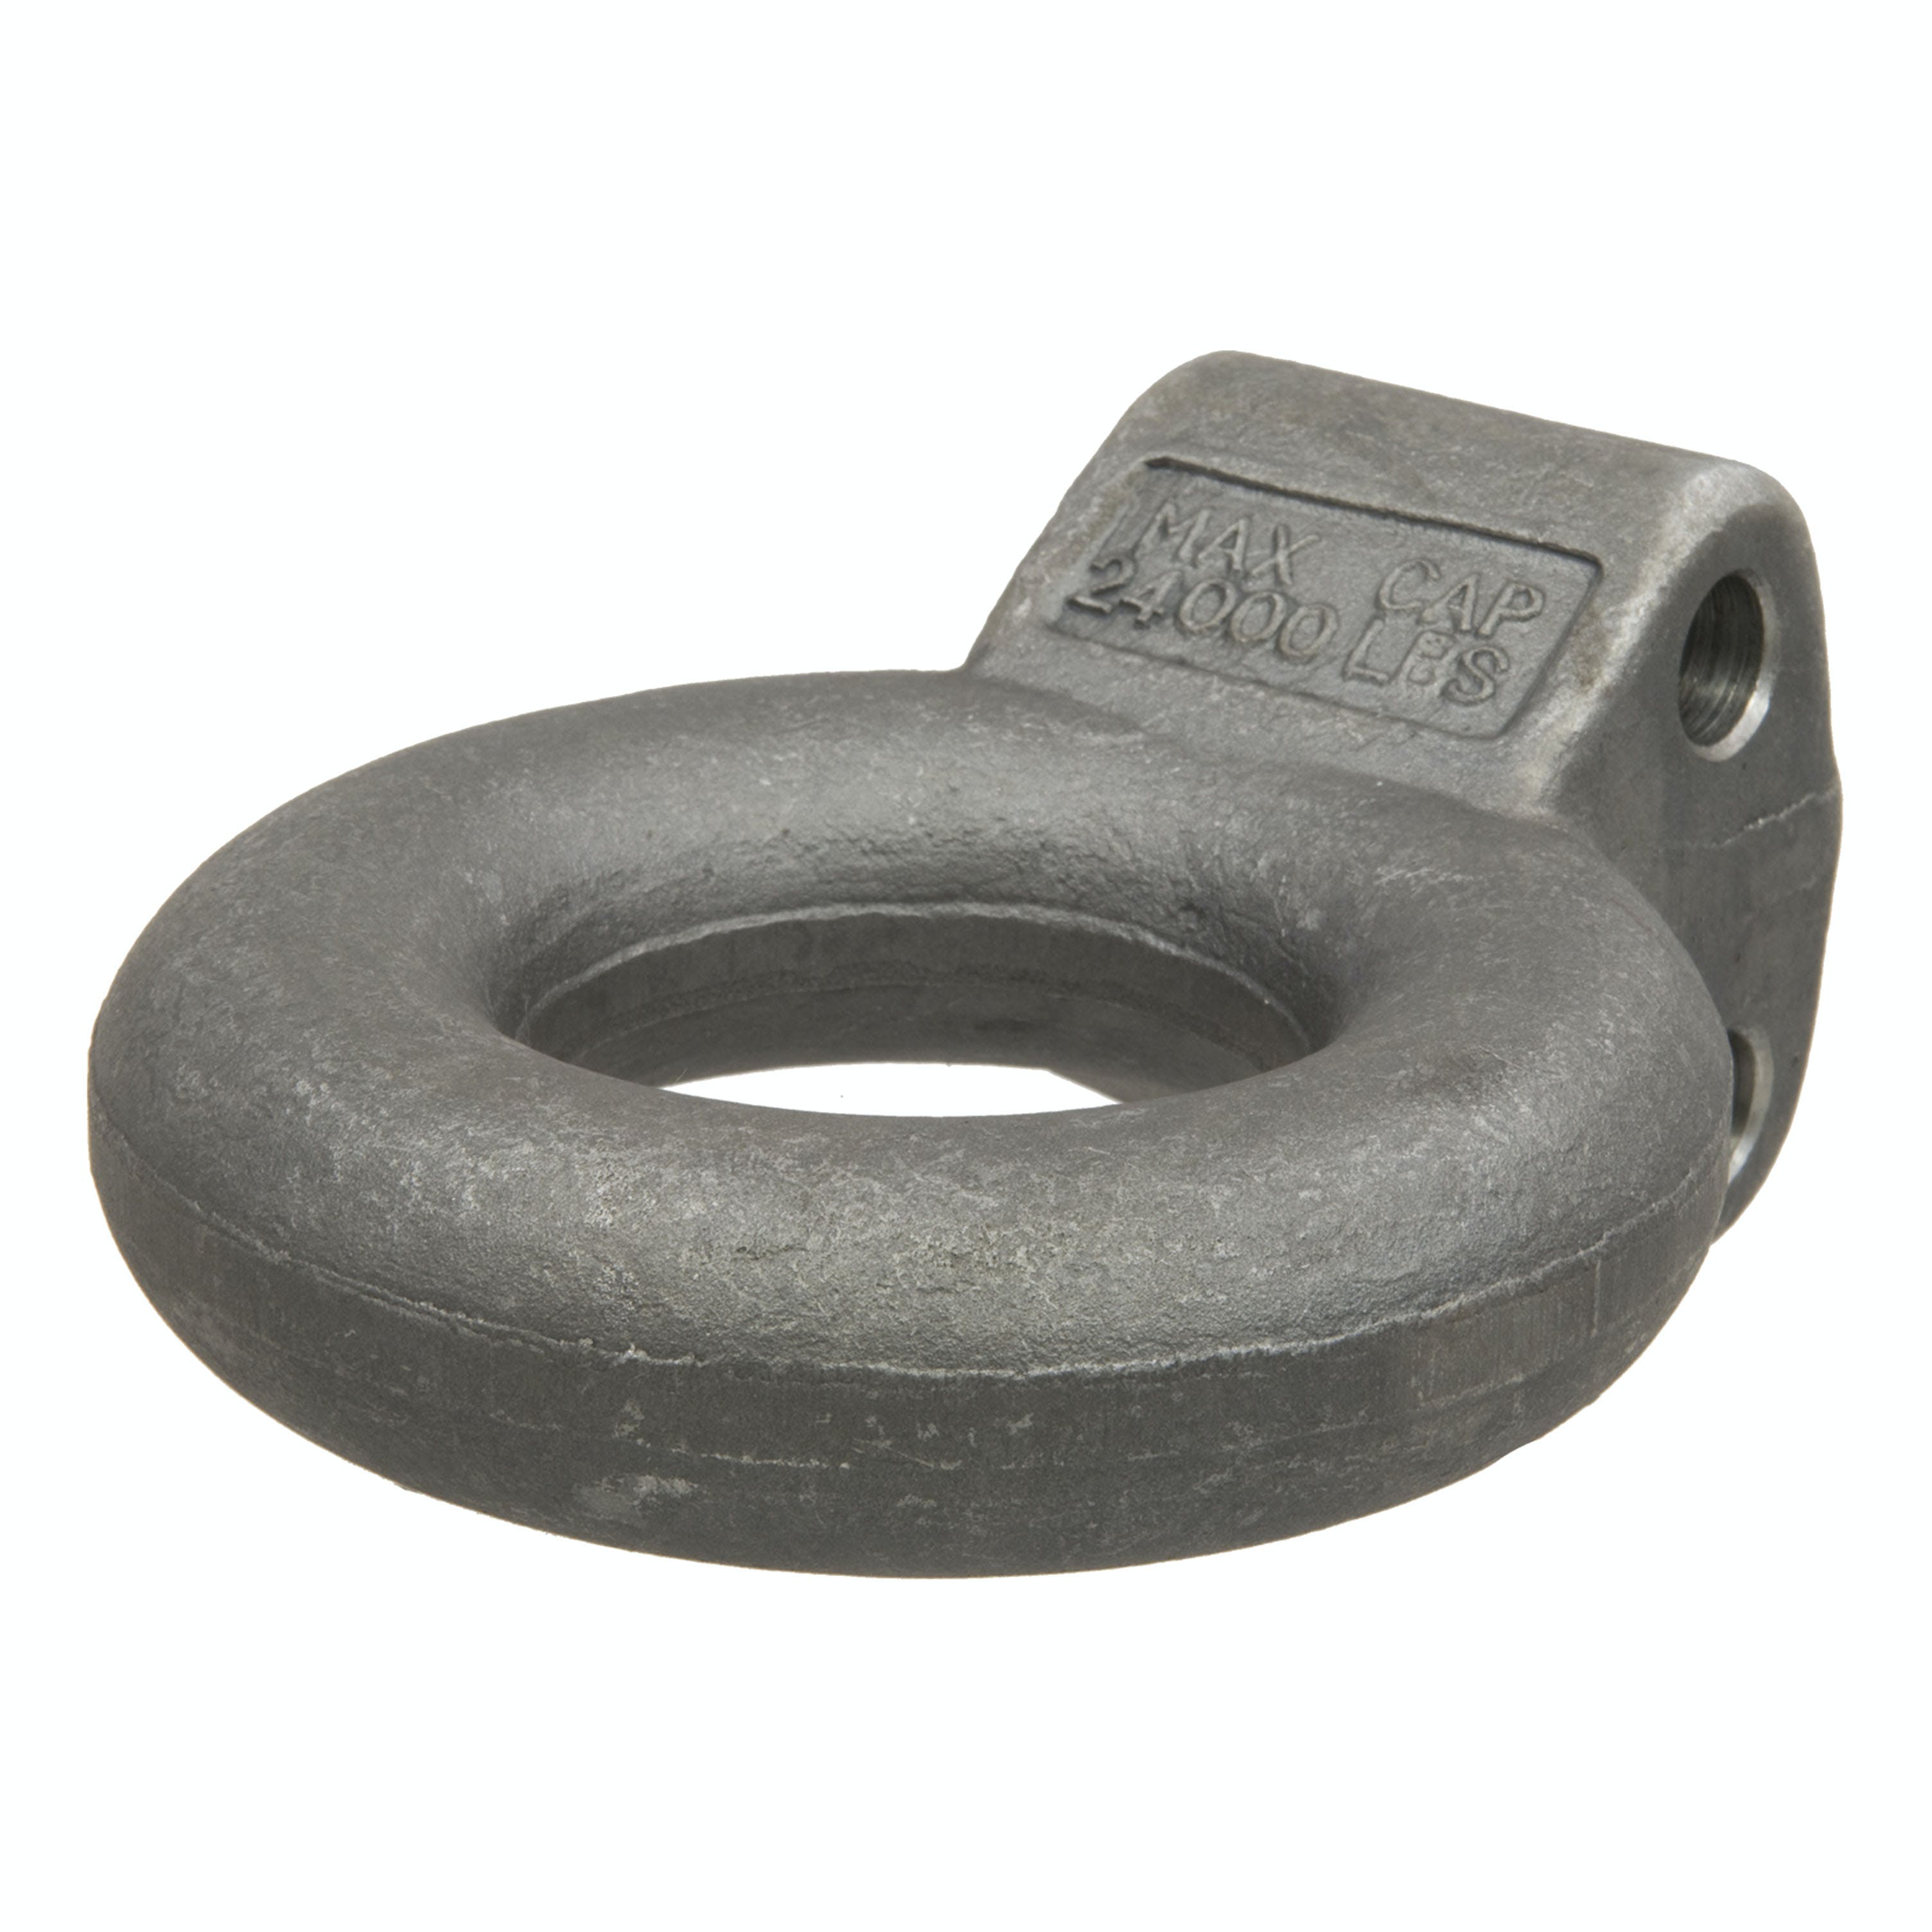 CURT 48660 Channel-Style Lunette Ring (24,000 lbs., 3 I.D., Raw)